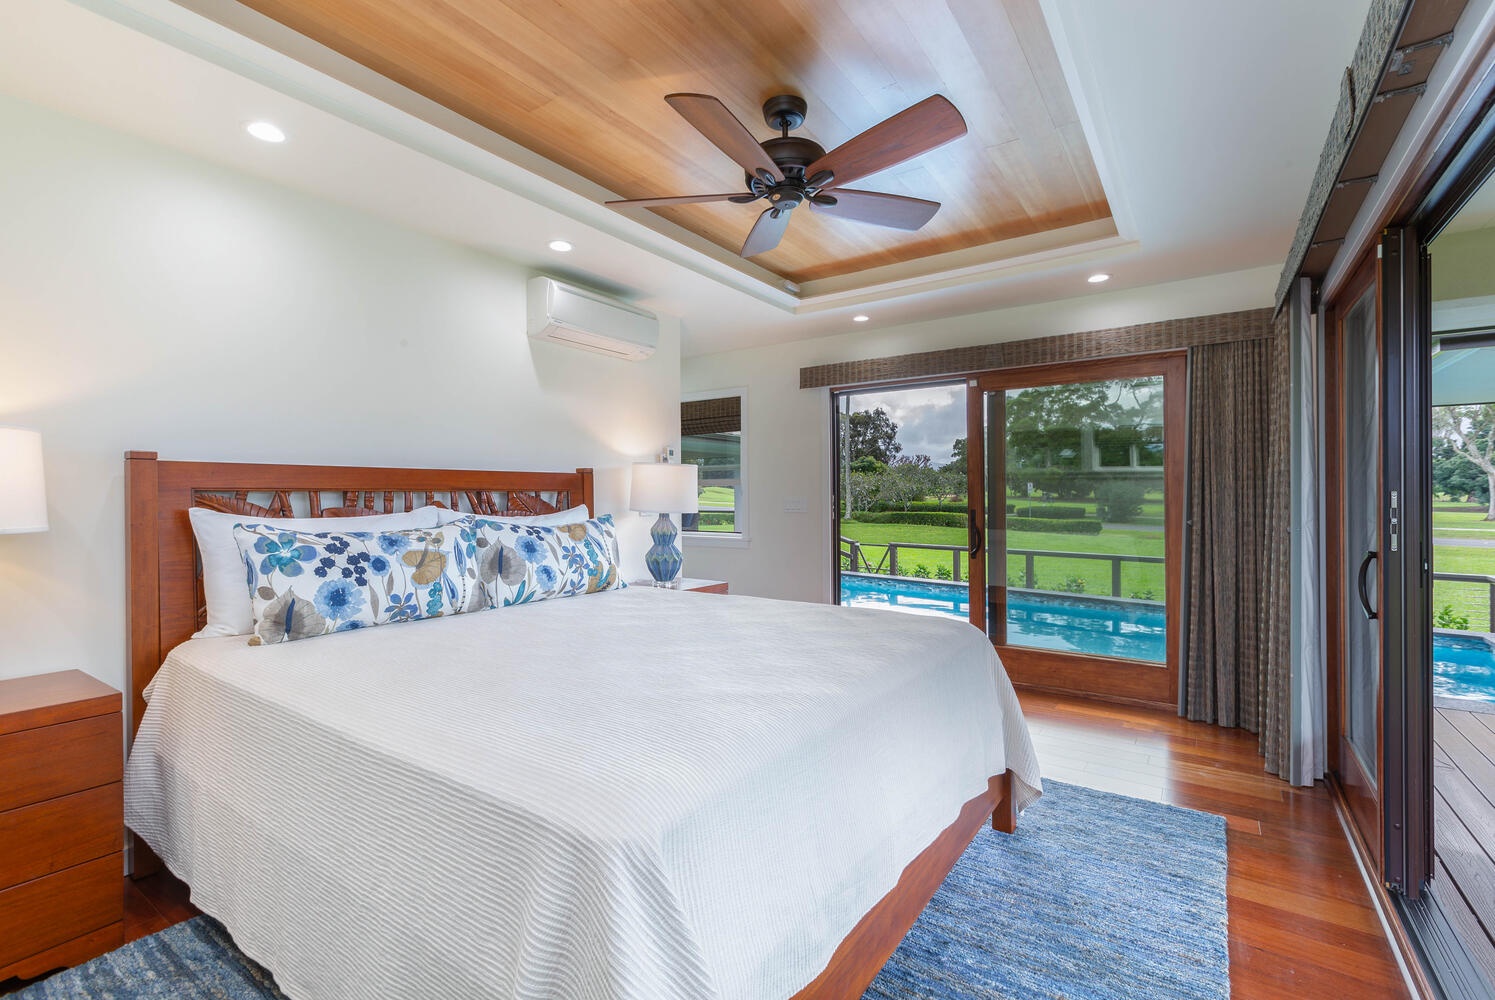 Princeville Vacation Rentals, Aloha Villa - Primary Bedroom with King bed and amazing views of the nature and Pool